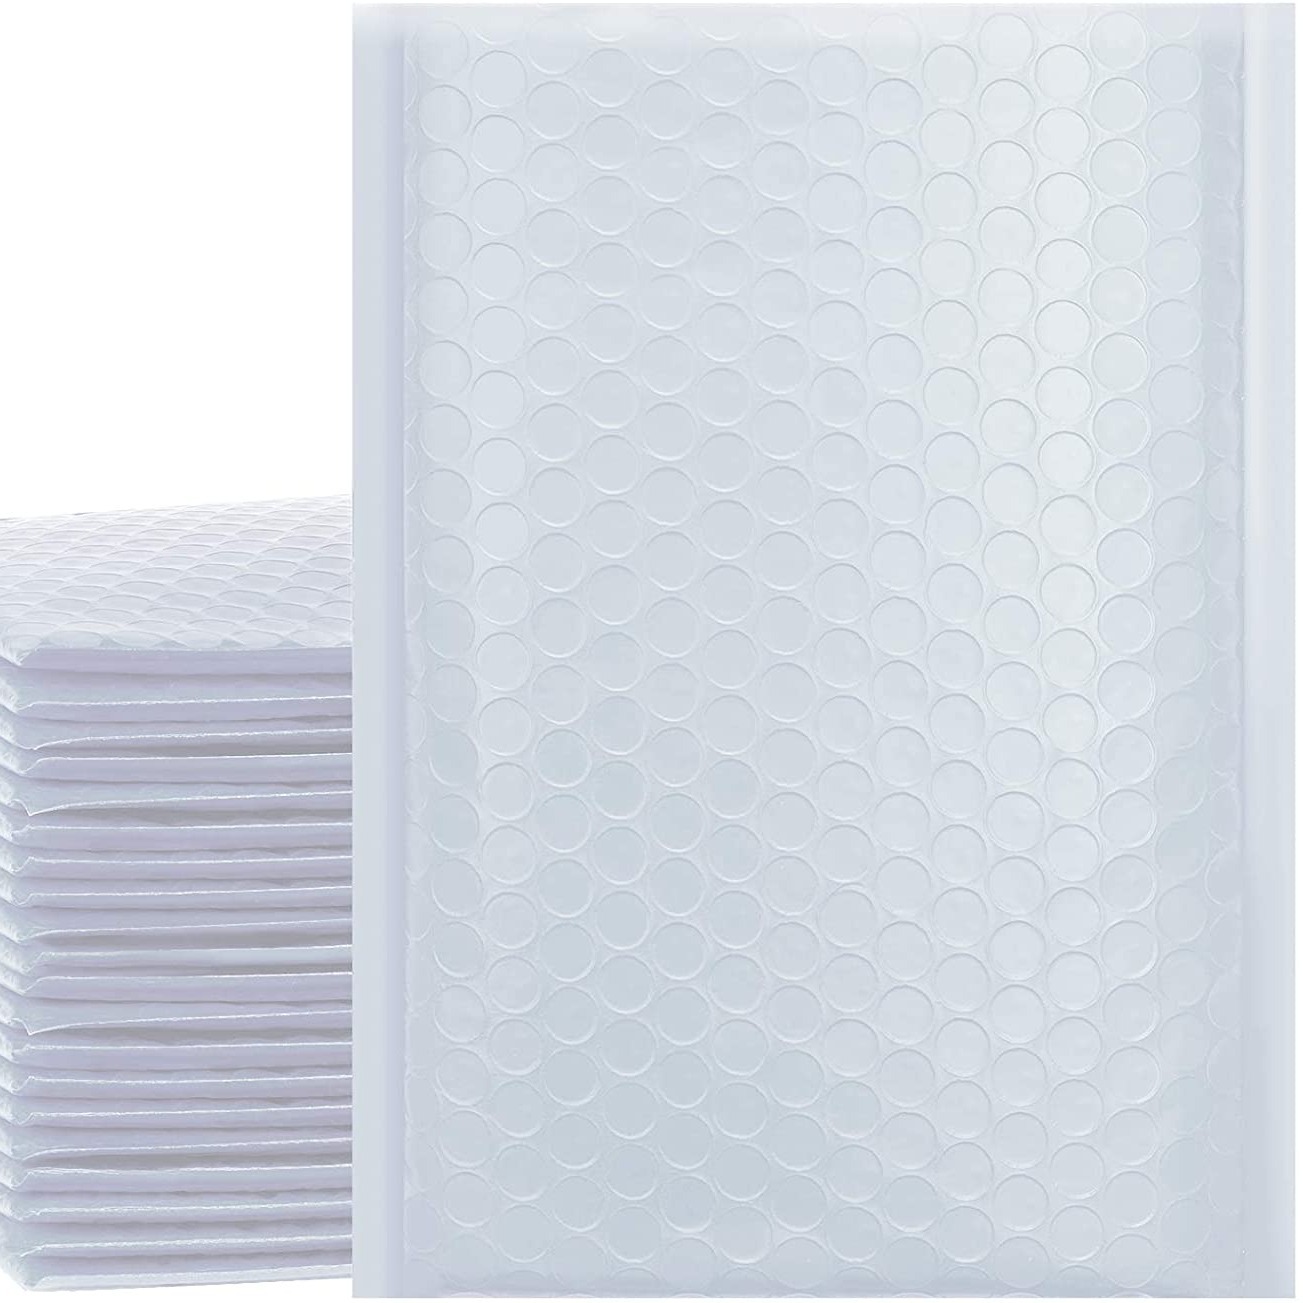 

Proline Poly Bubble Padded Envelopes Self-sealing Mailers Extra Wide 6.5x10 (inner 6.5x9)